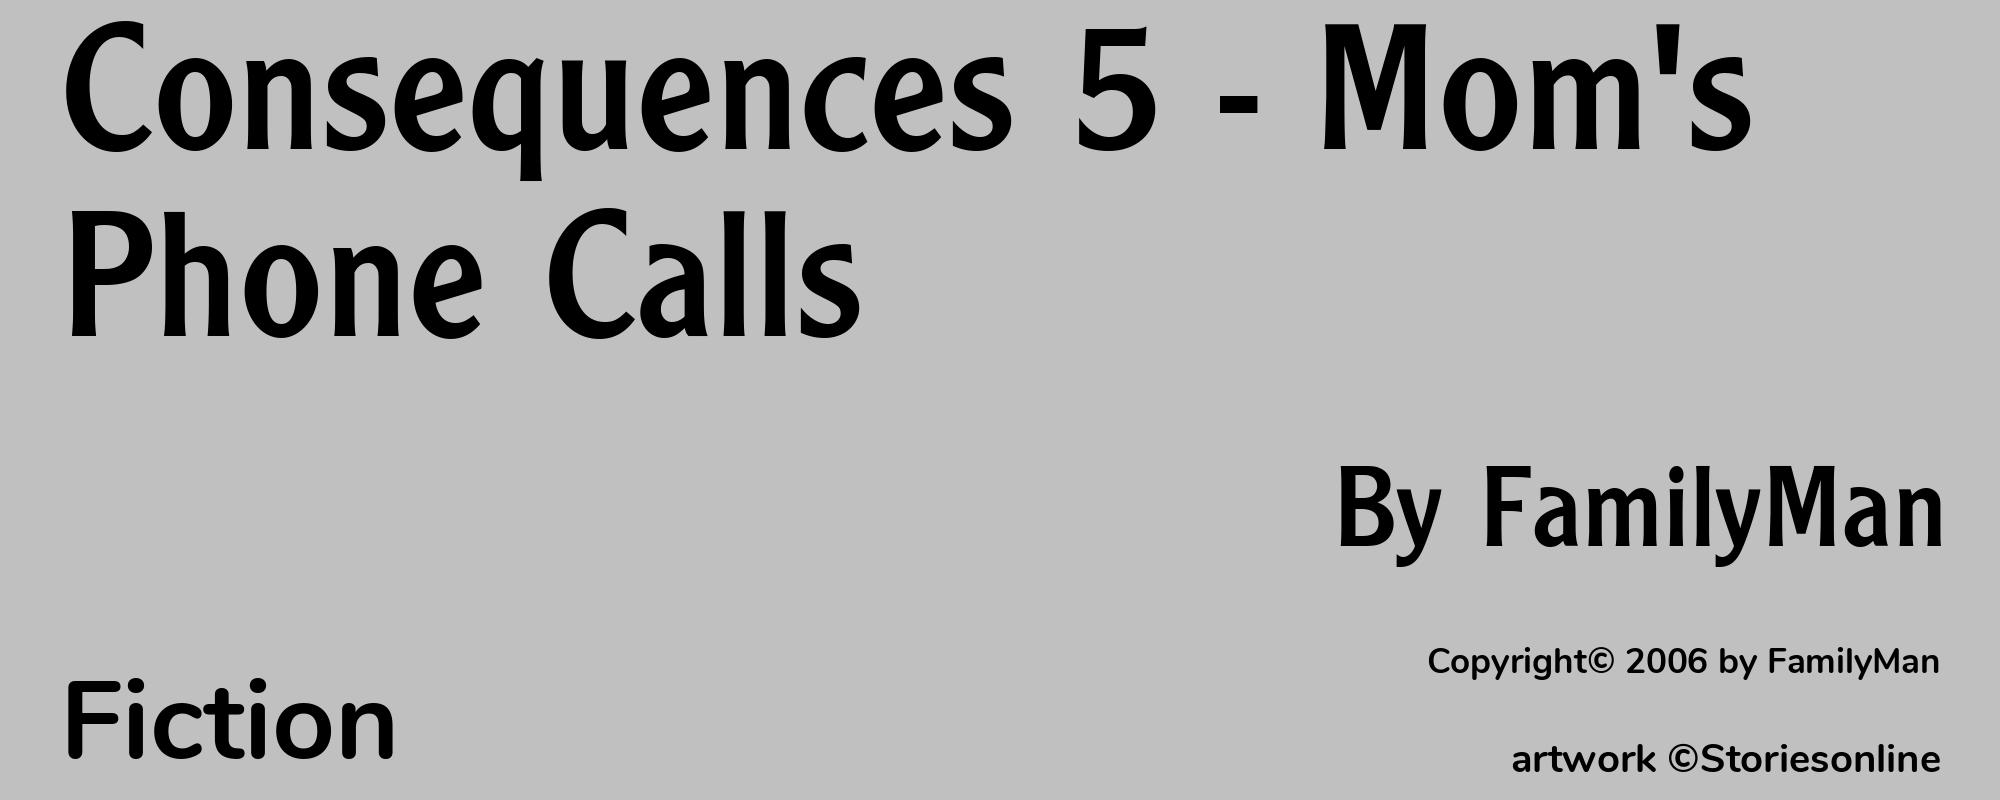 Consequences 5 - Mom's Phone Calls - Cover